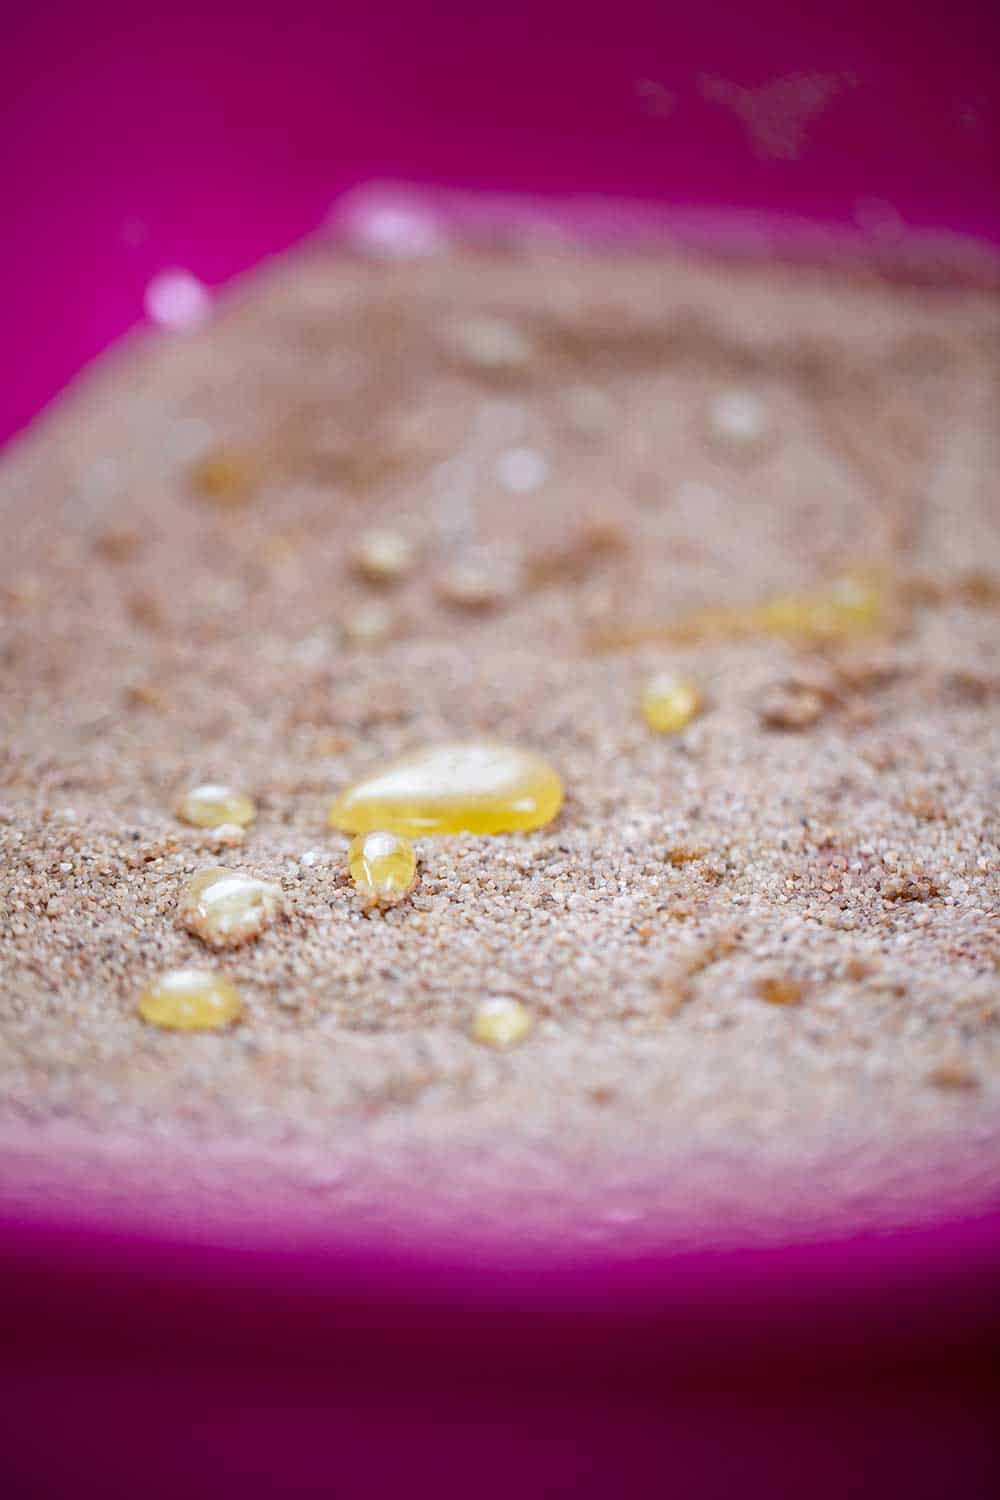 Water repellent cat sand in litter box with cat urine